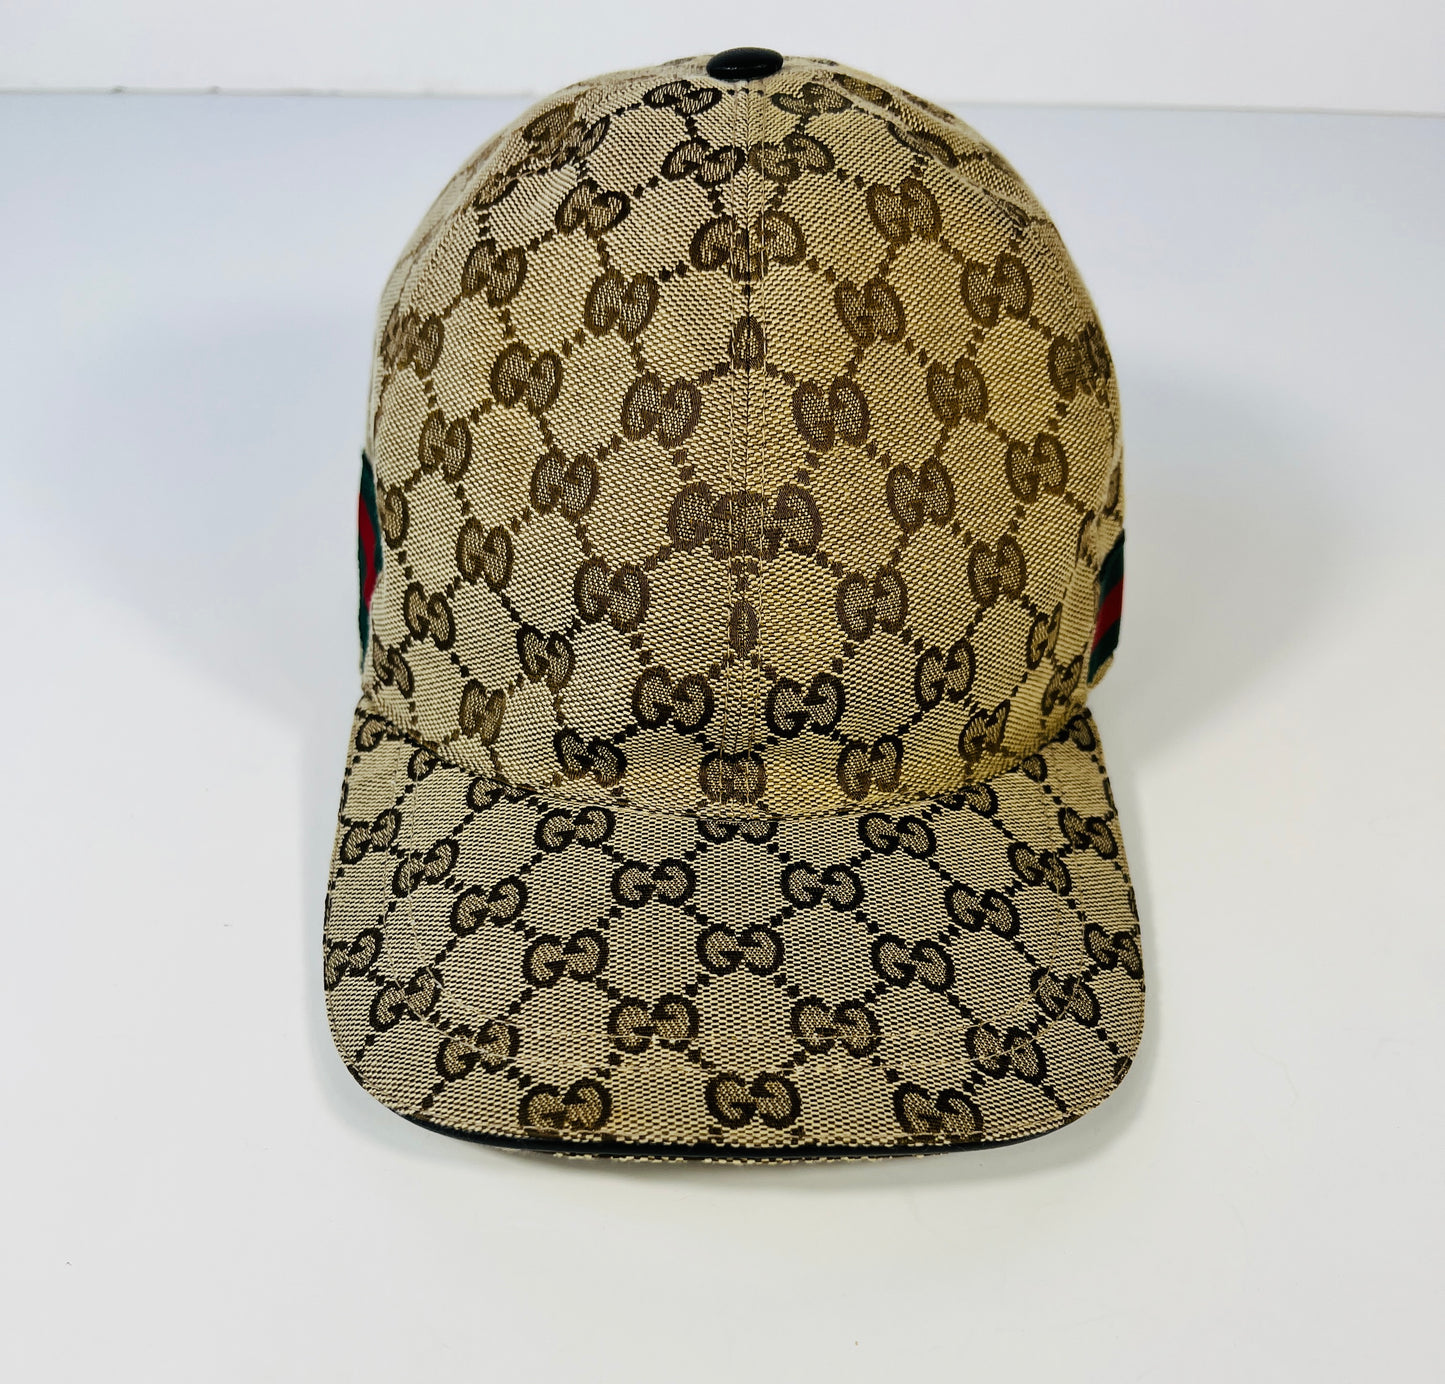 Gucci Original GG Canvas Baseball Hat with Web Beige/Brown in